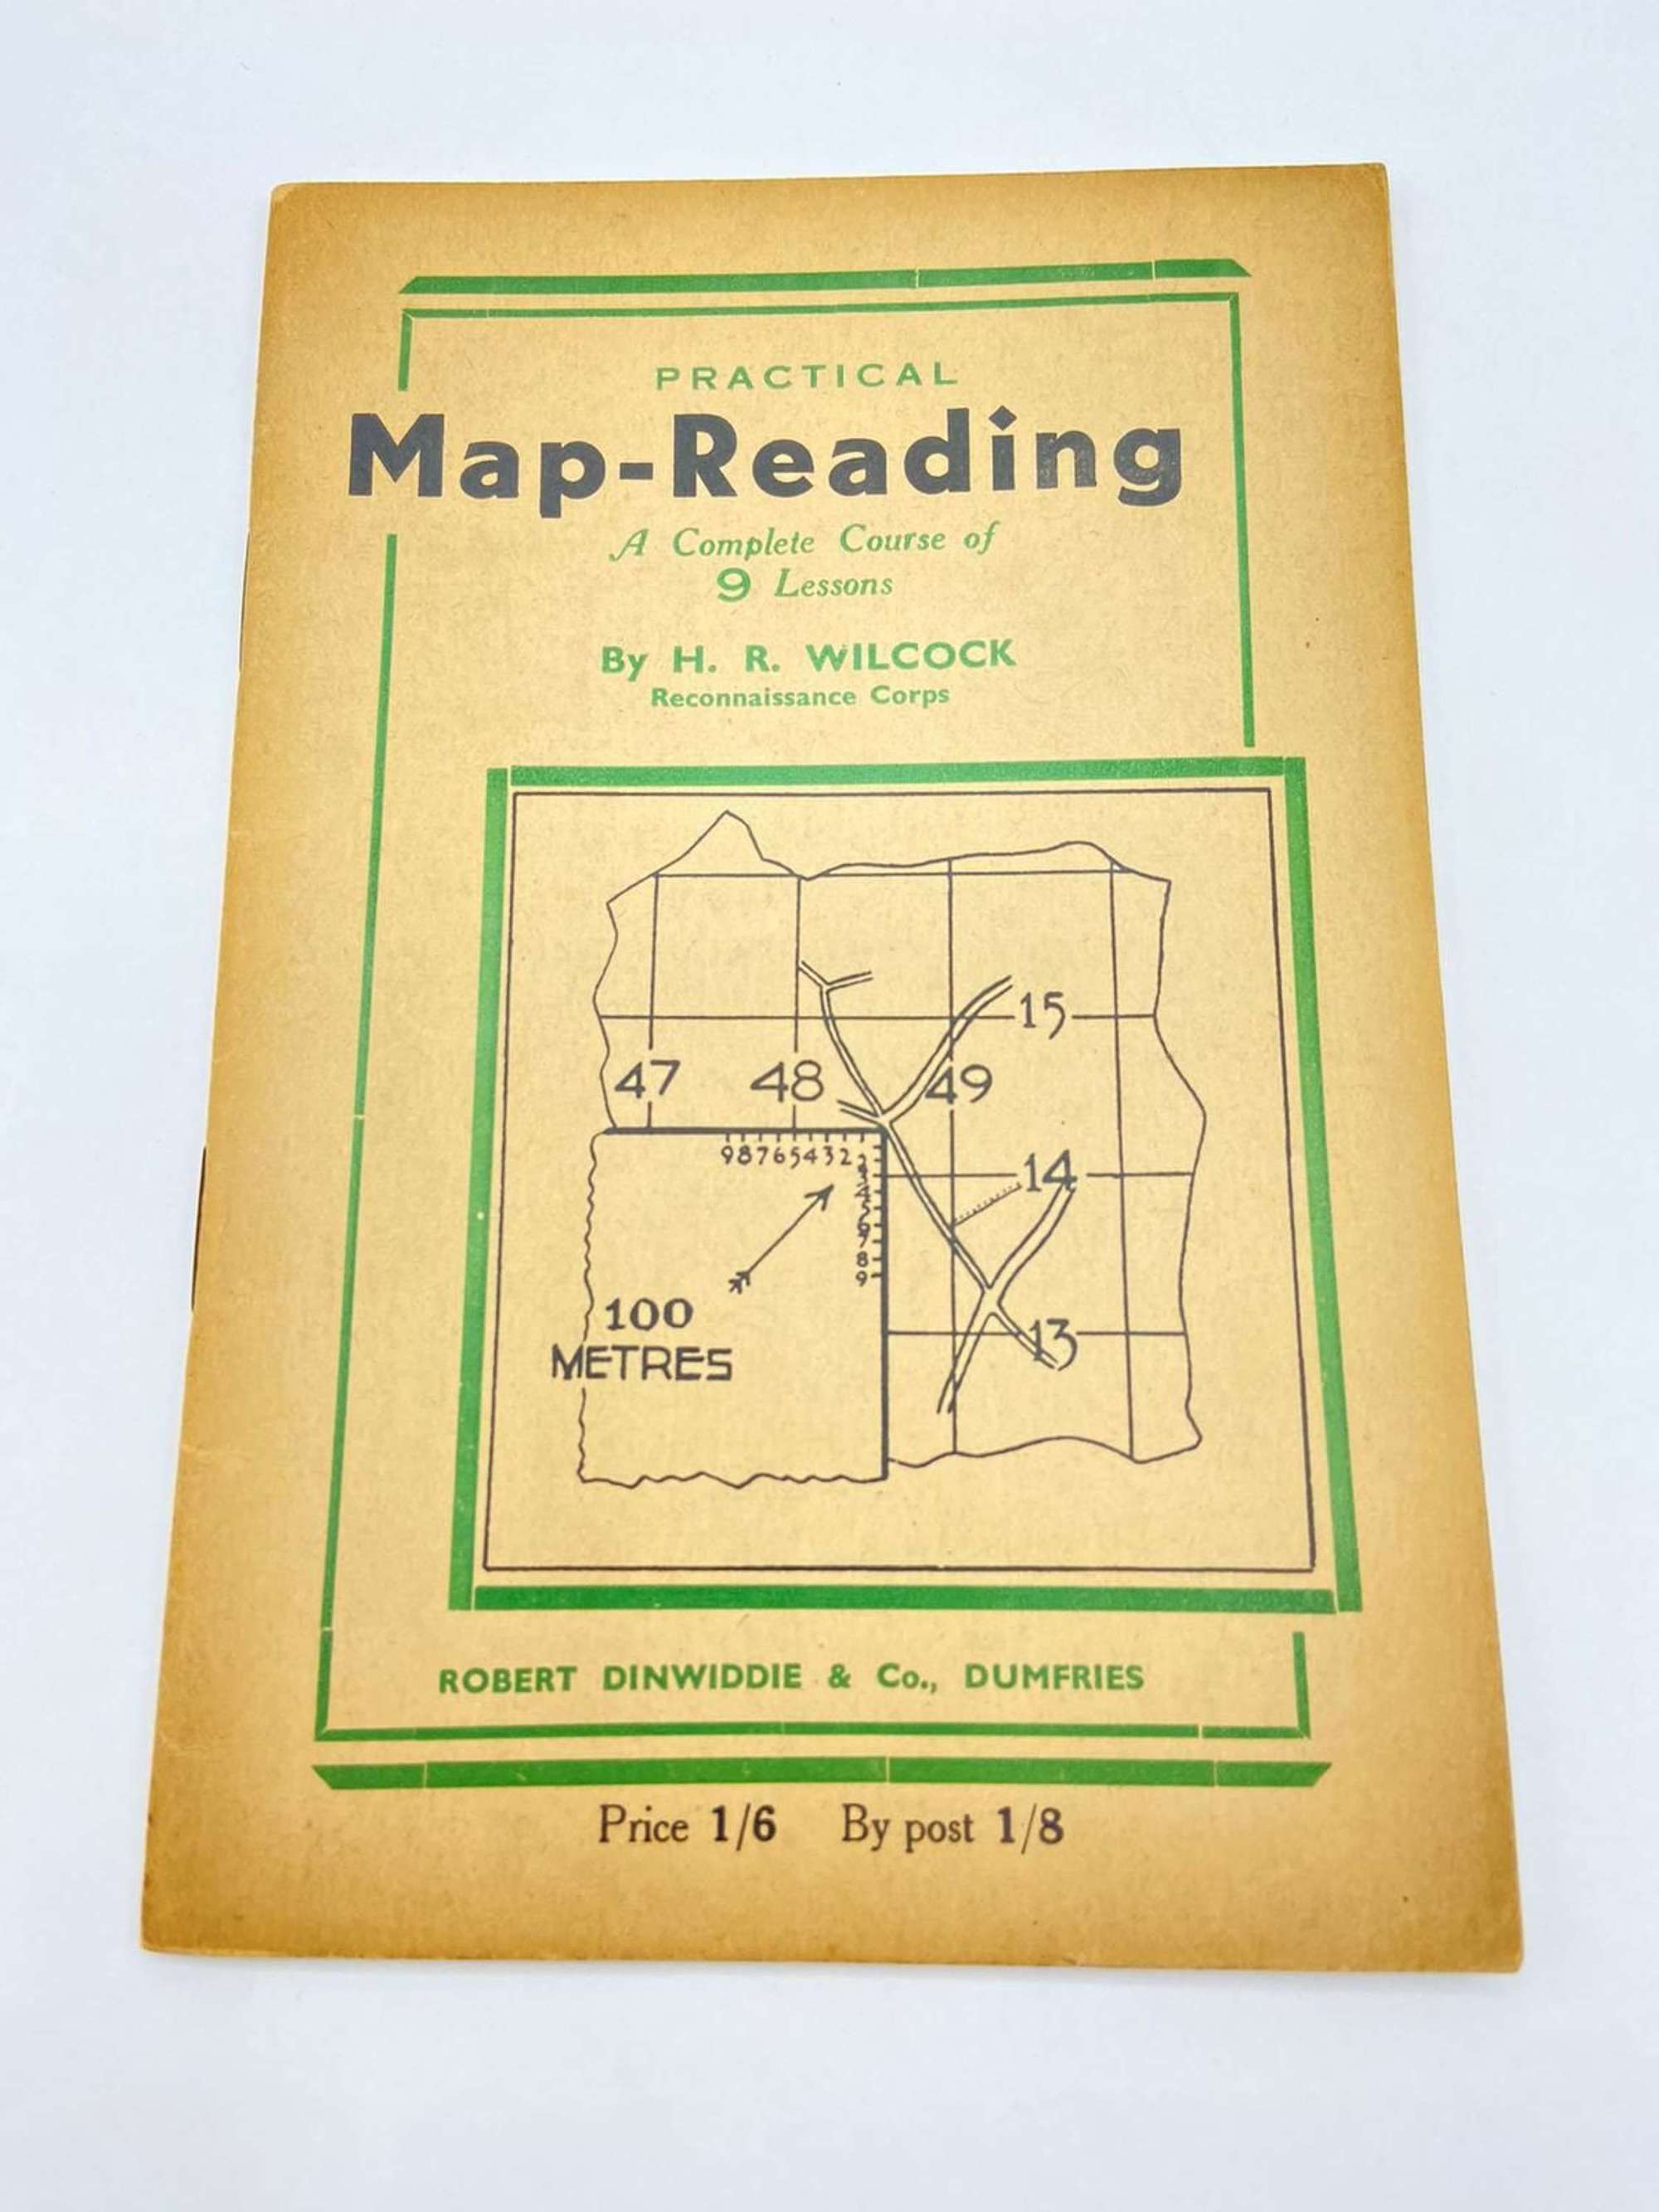 WW2 Practical Map Reading, Complete Course Of 9 Lessons By H.R Wilcock